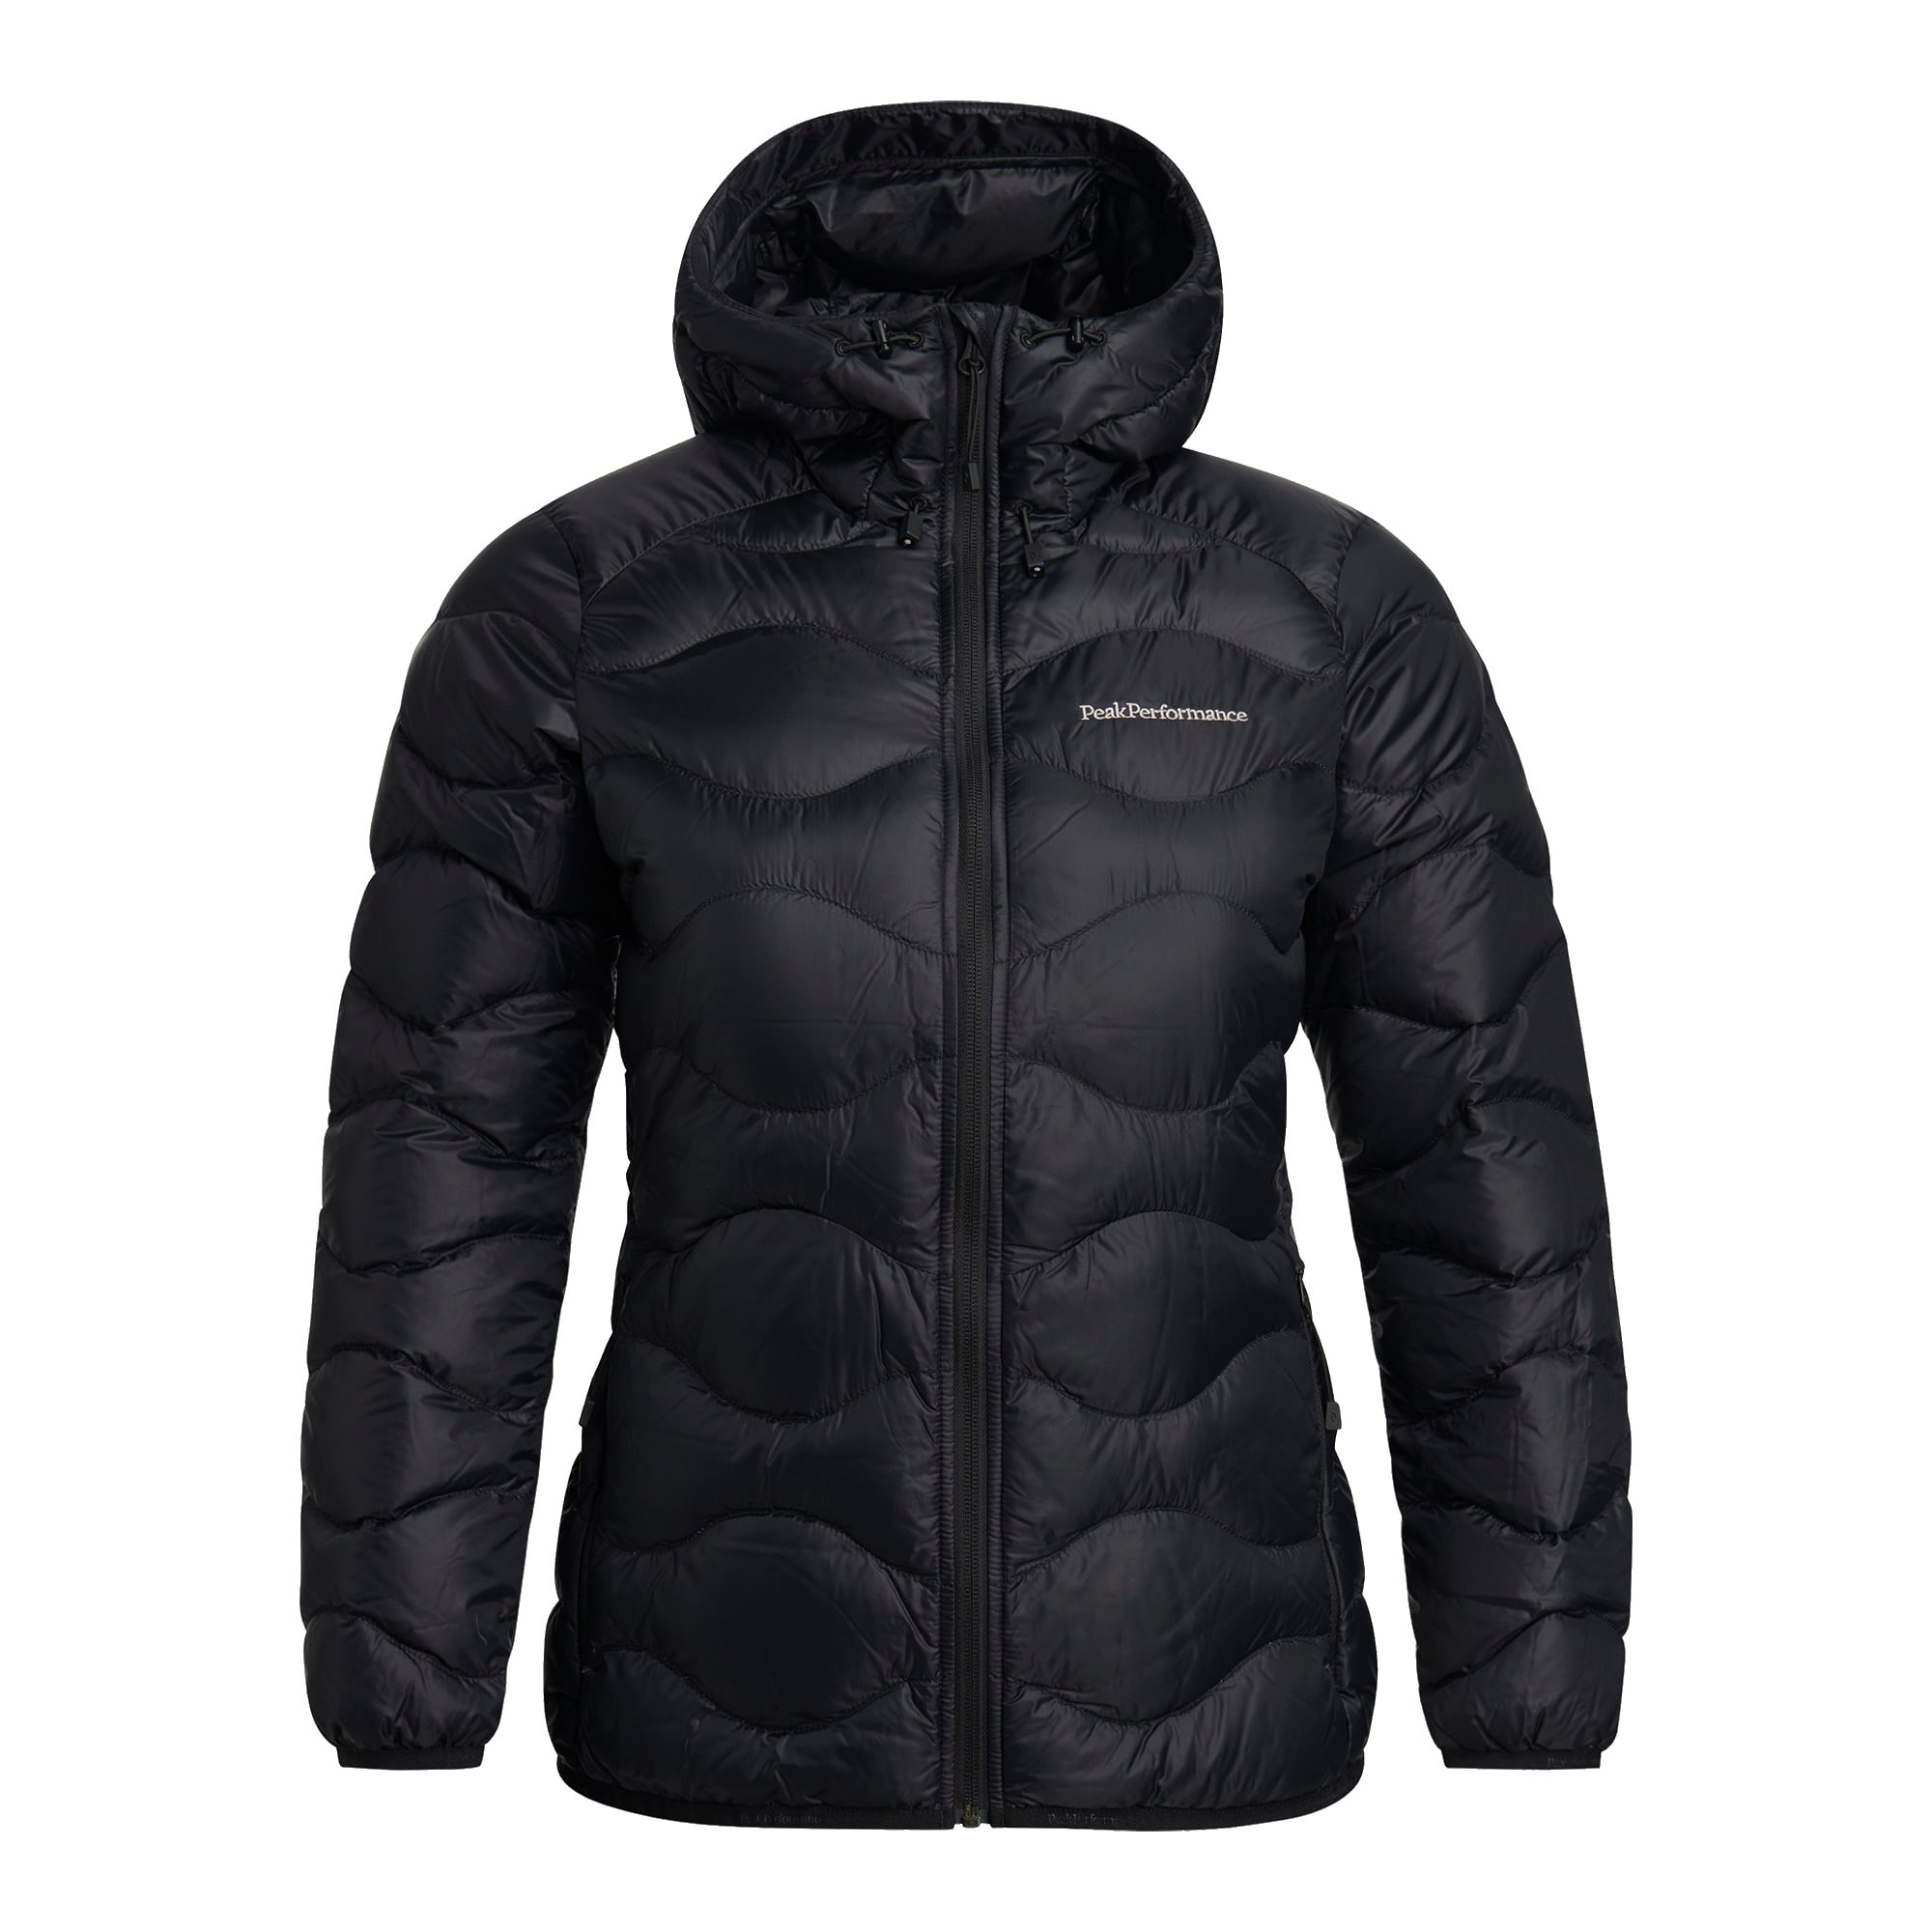 Buy Peak Performance Women's Hood from Outnorth